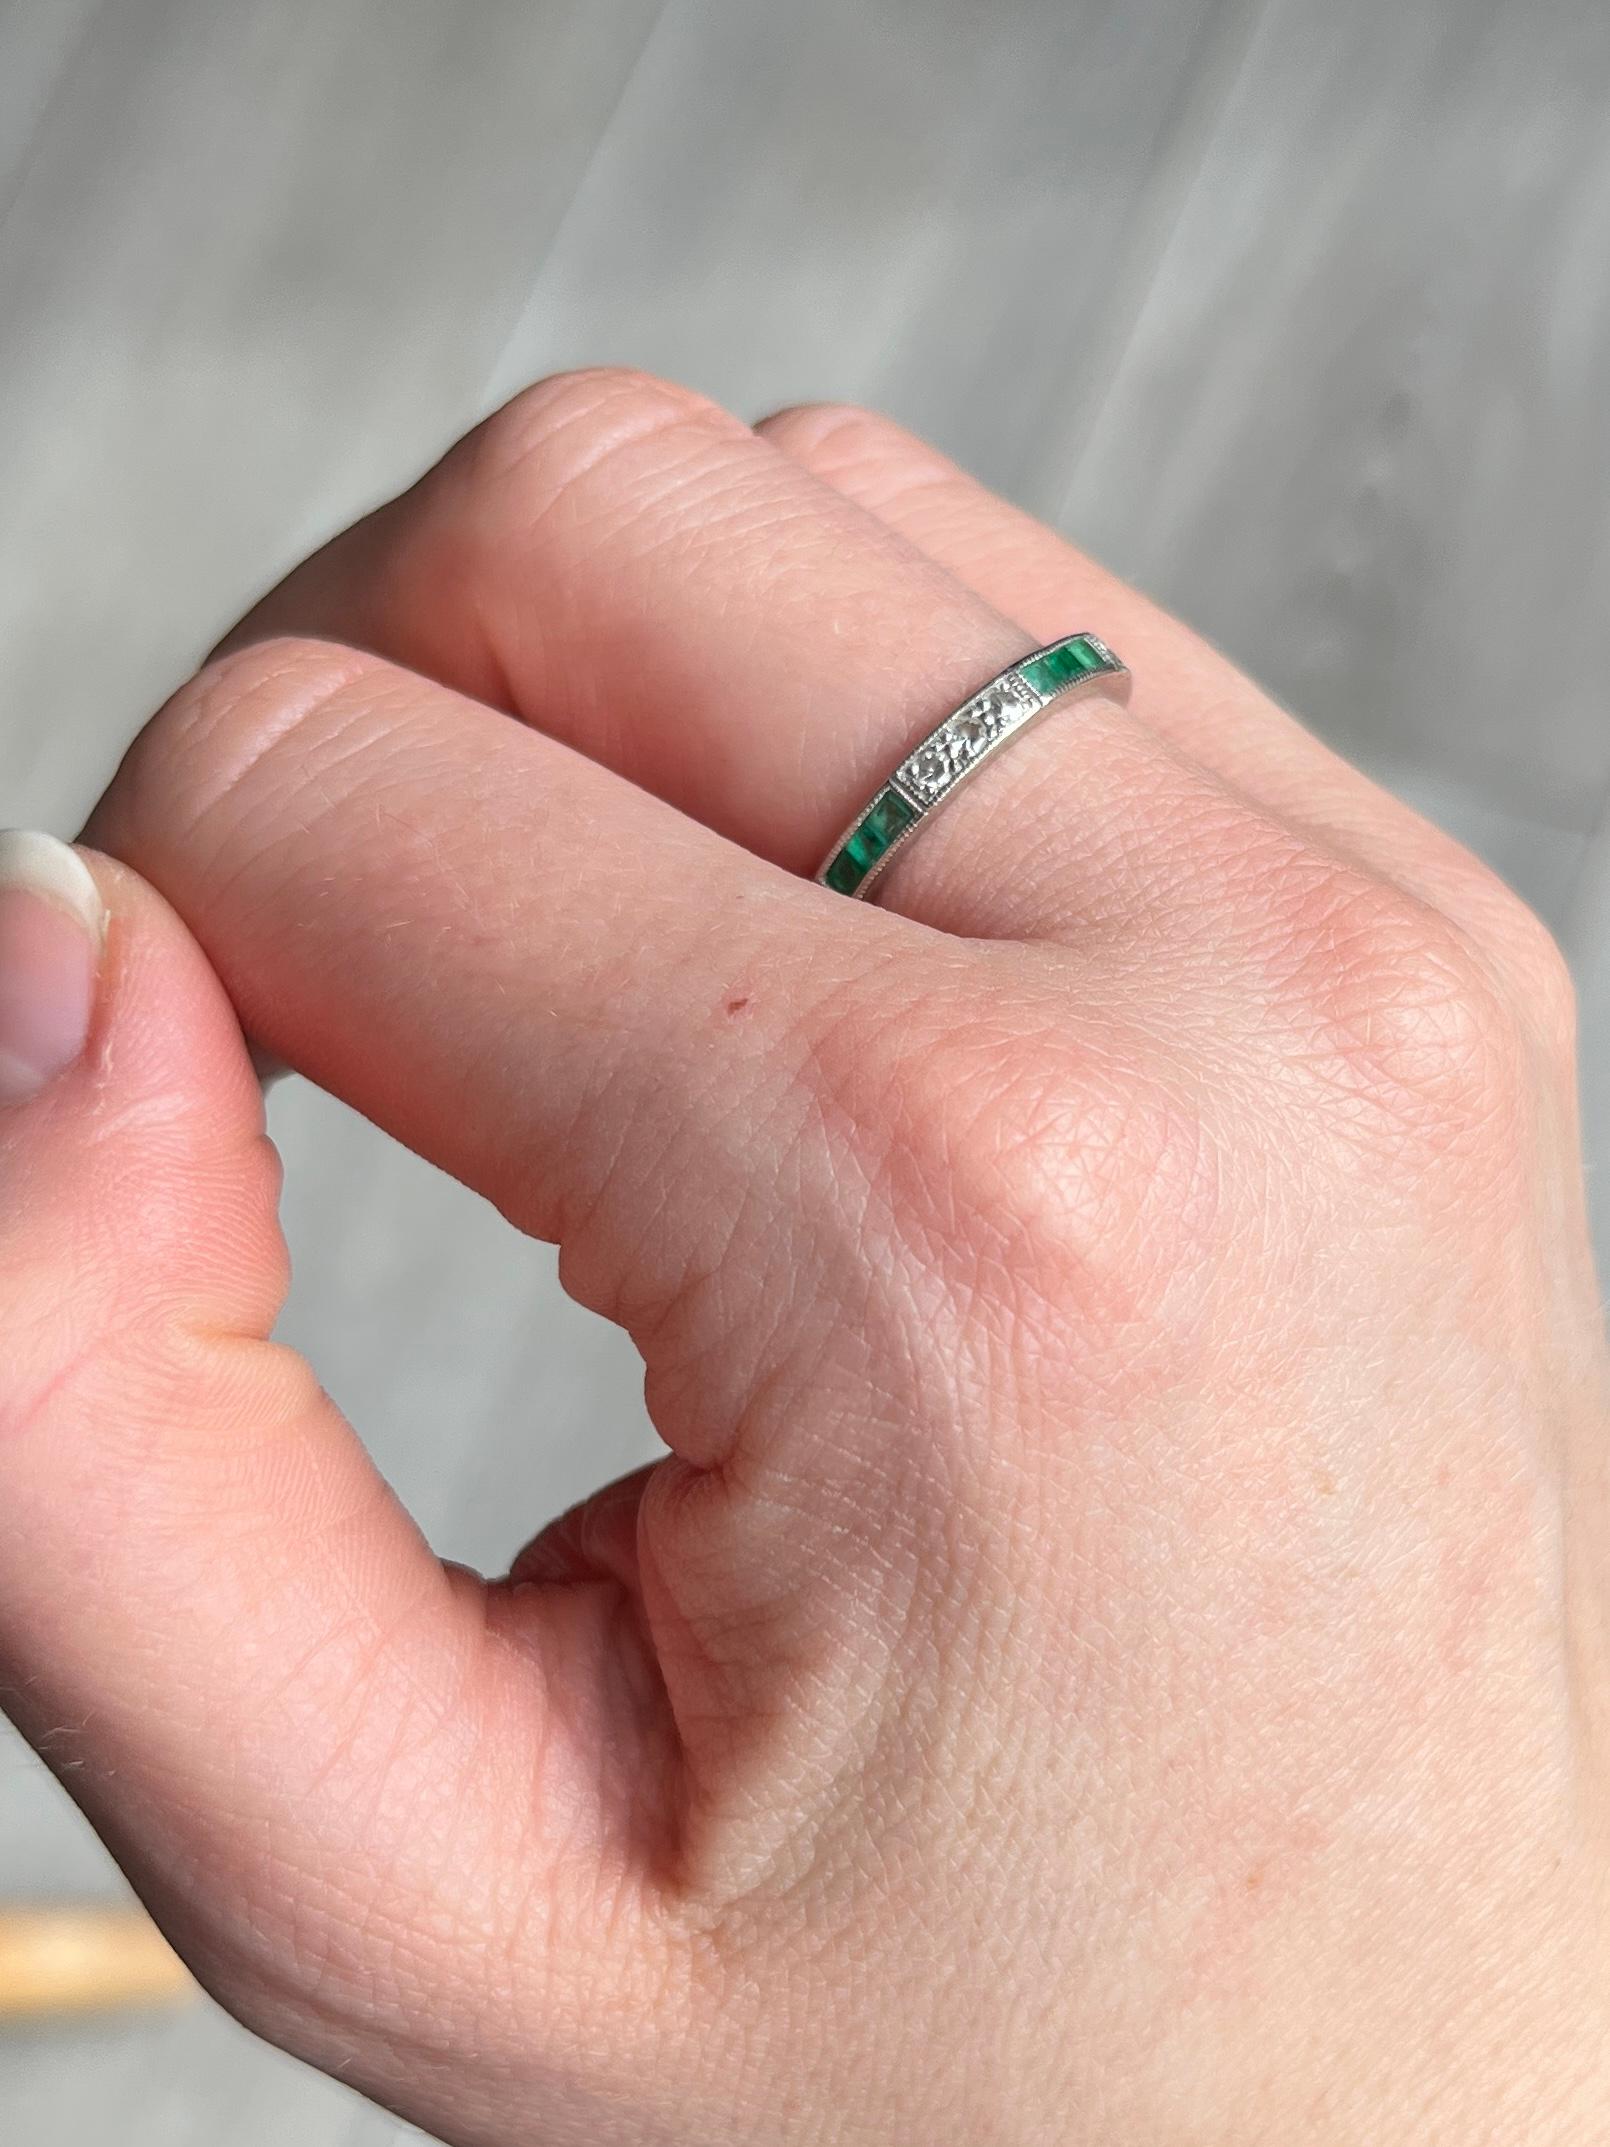 A stunning Art Deco eternity band ring set with emeralds and diamonds. Alternating collections of three square cut green emeralds measuring 5pts each are set between a trios of round-cut white diamonds measuring 3pts each. The stones are set around